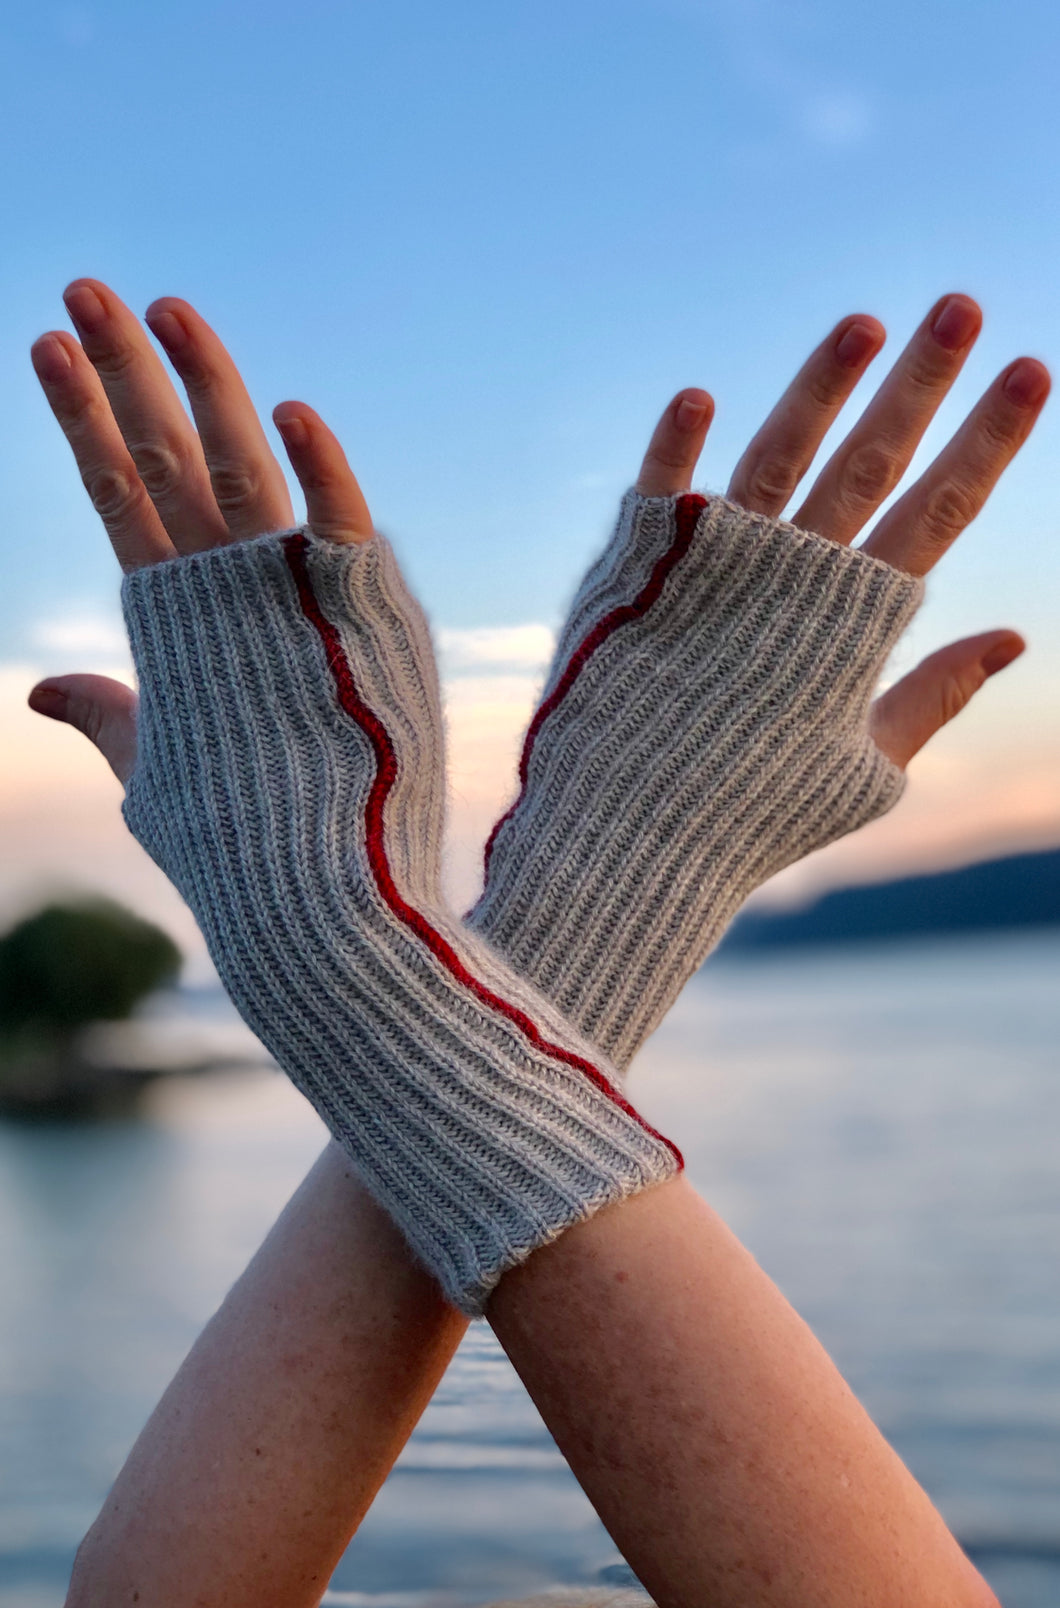 Photo advertising knitting pattern for fingerless mitts. Photo shows two hands extended in the air with a river in the backdrop. The mitts are made with grey alpaca and feature brioche stitches and a red seam.